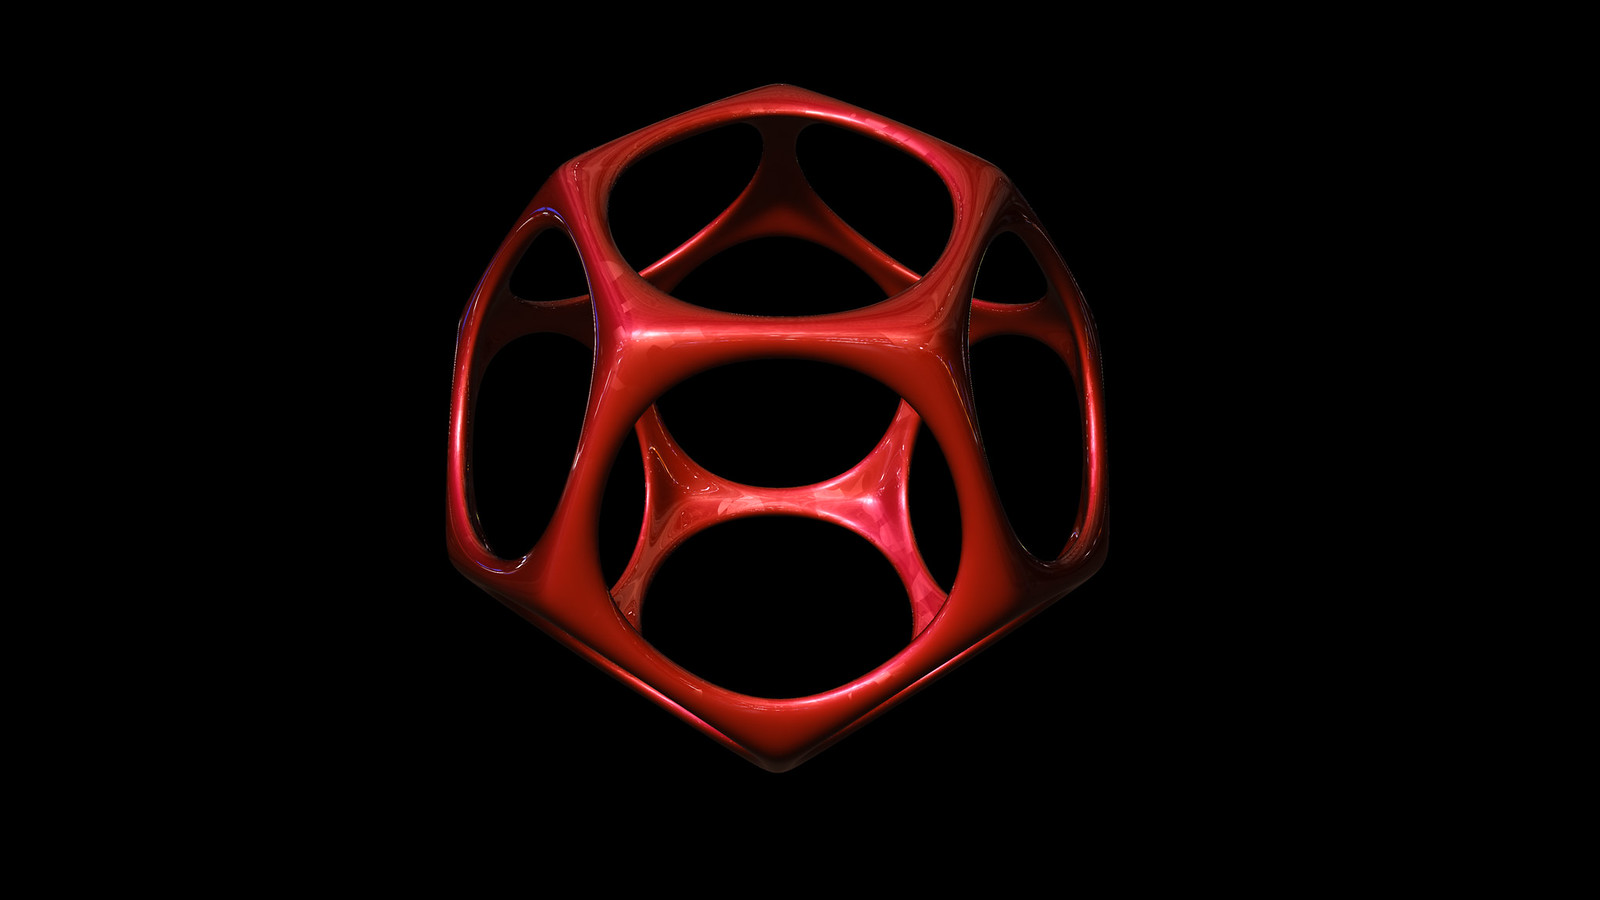 Dodecahedron soft